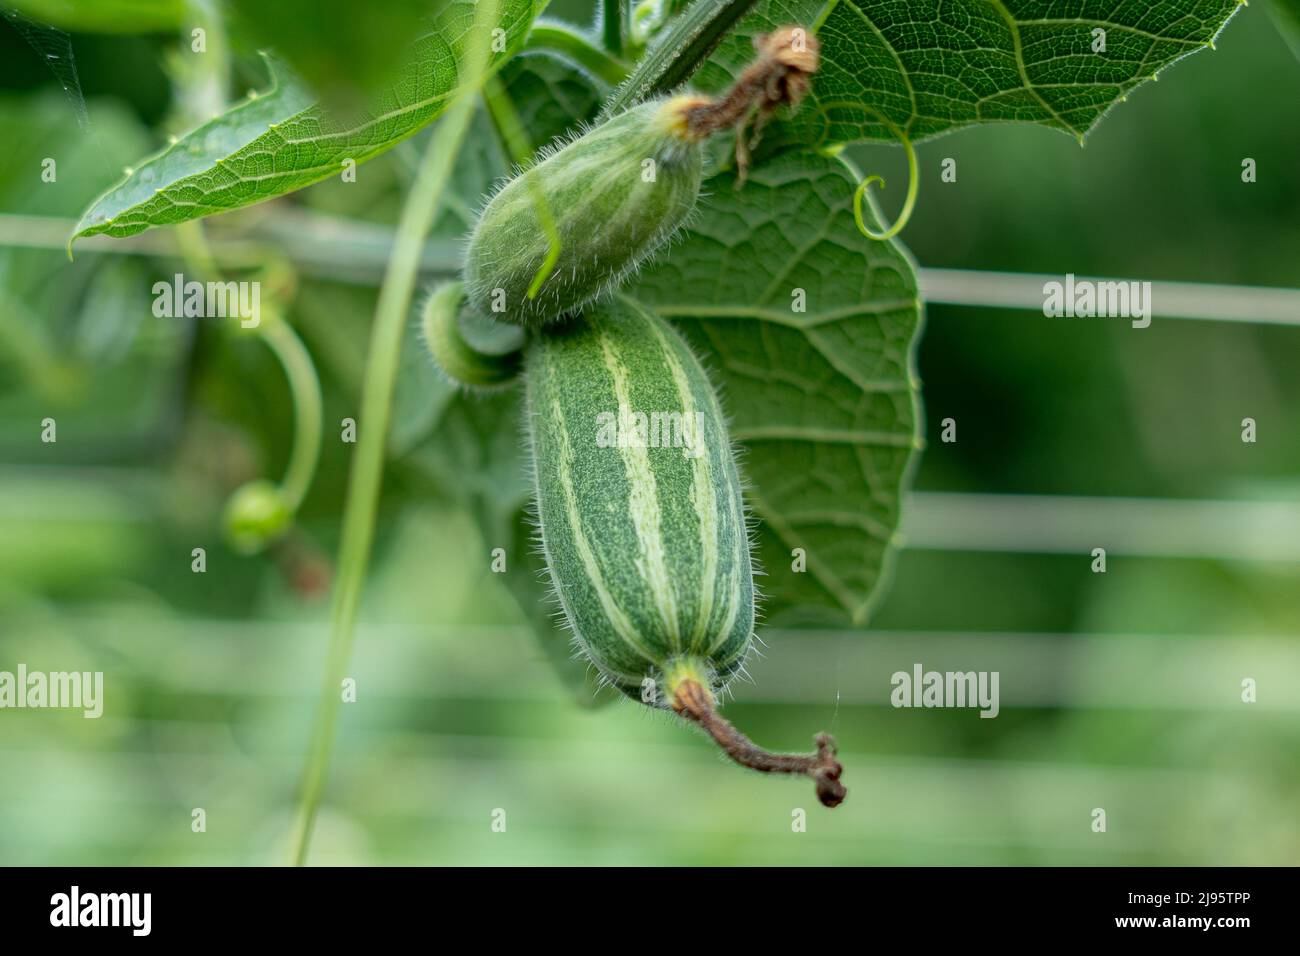 Close up of green Pointed gourde in vegetable garden Banque D'Images